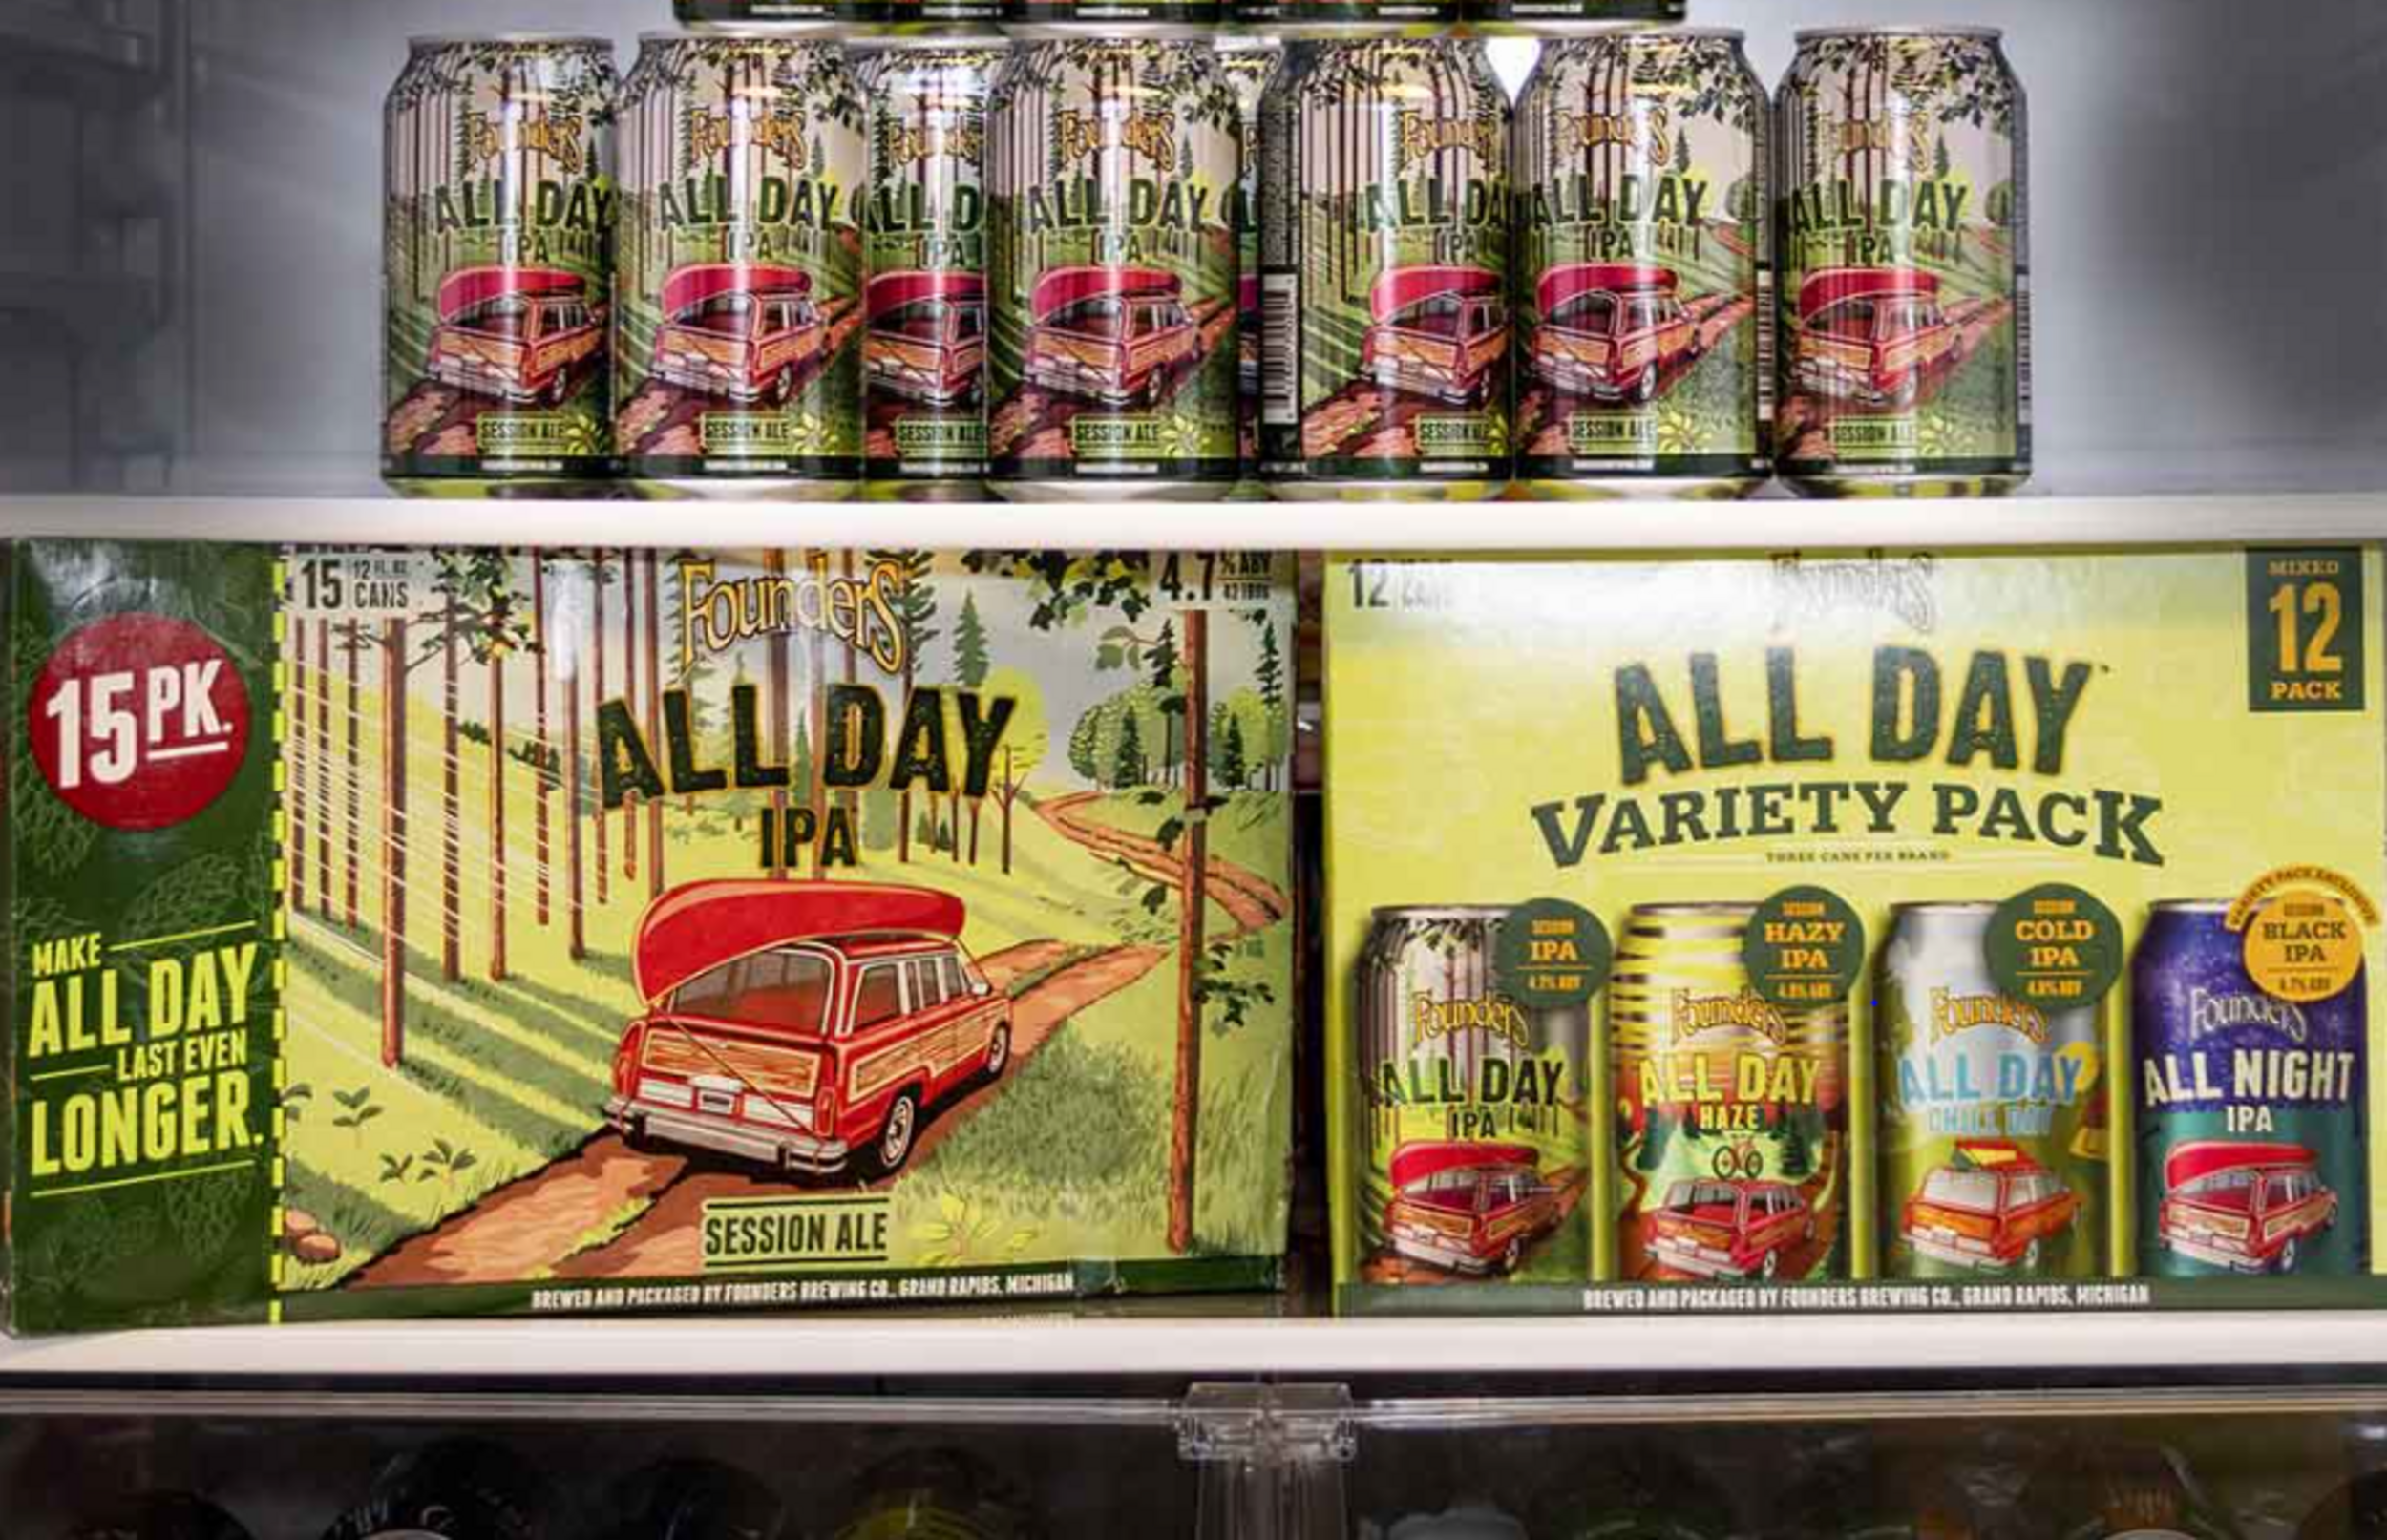 <p>Their All Day IPA is among the top-selling craft beers in the country. Founders lay claim to being one of the biggest breweries in the state and infuse their Michigan heritage in all of their beers. Their Grand Rapids facility features all of their core beers along with plenty of taproom exclusives, which — along with their unique building that formerly was a trucking depot — makes Founders a must-visit when near the Great Lakes State. </p><p>You may also like: <a href='https://www.yardbarker.com/lifestyle/articles/20_easy_packing_tips_to_remember_for_your_next_trip/s1__40187139'>20 easy packing tips to remember for your next trip</a></p>